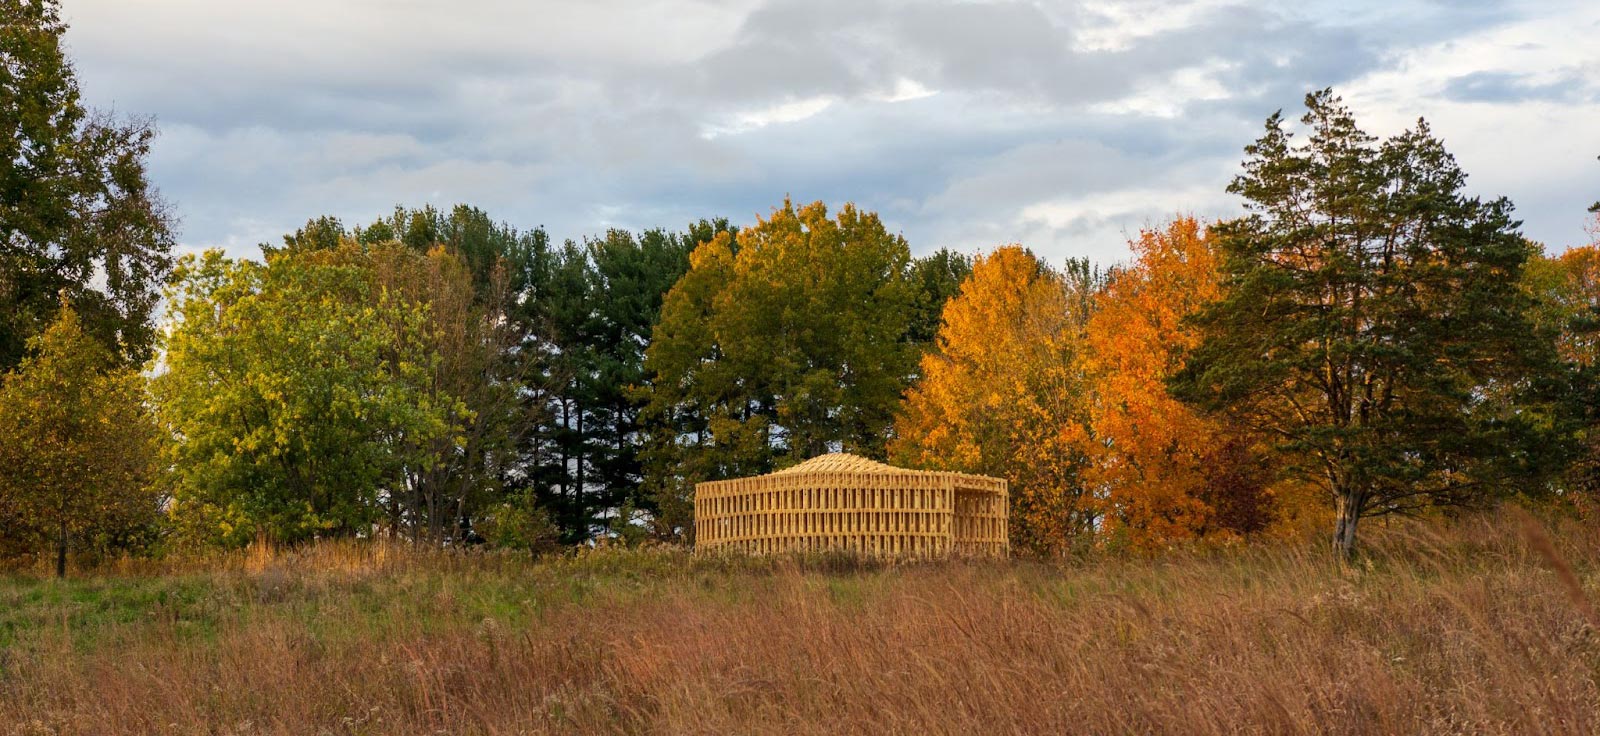 Robotically Fabricated Structure (RFS) amongst a grass field and trees with colorful fall foliage